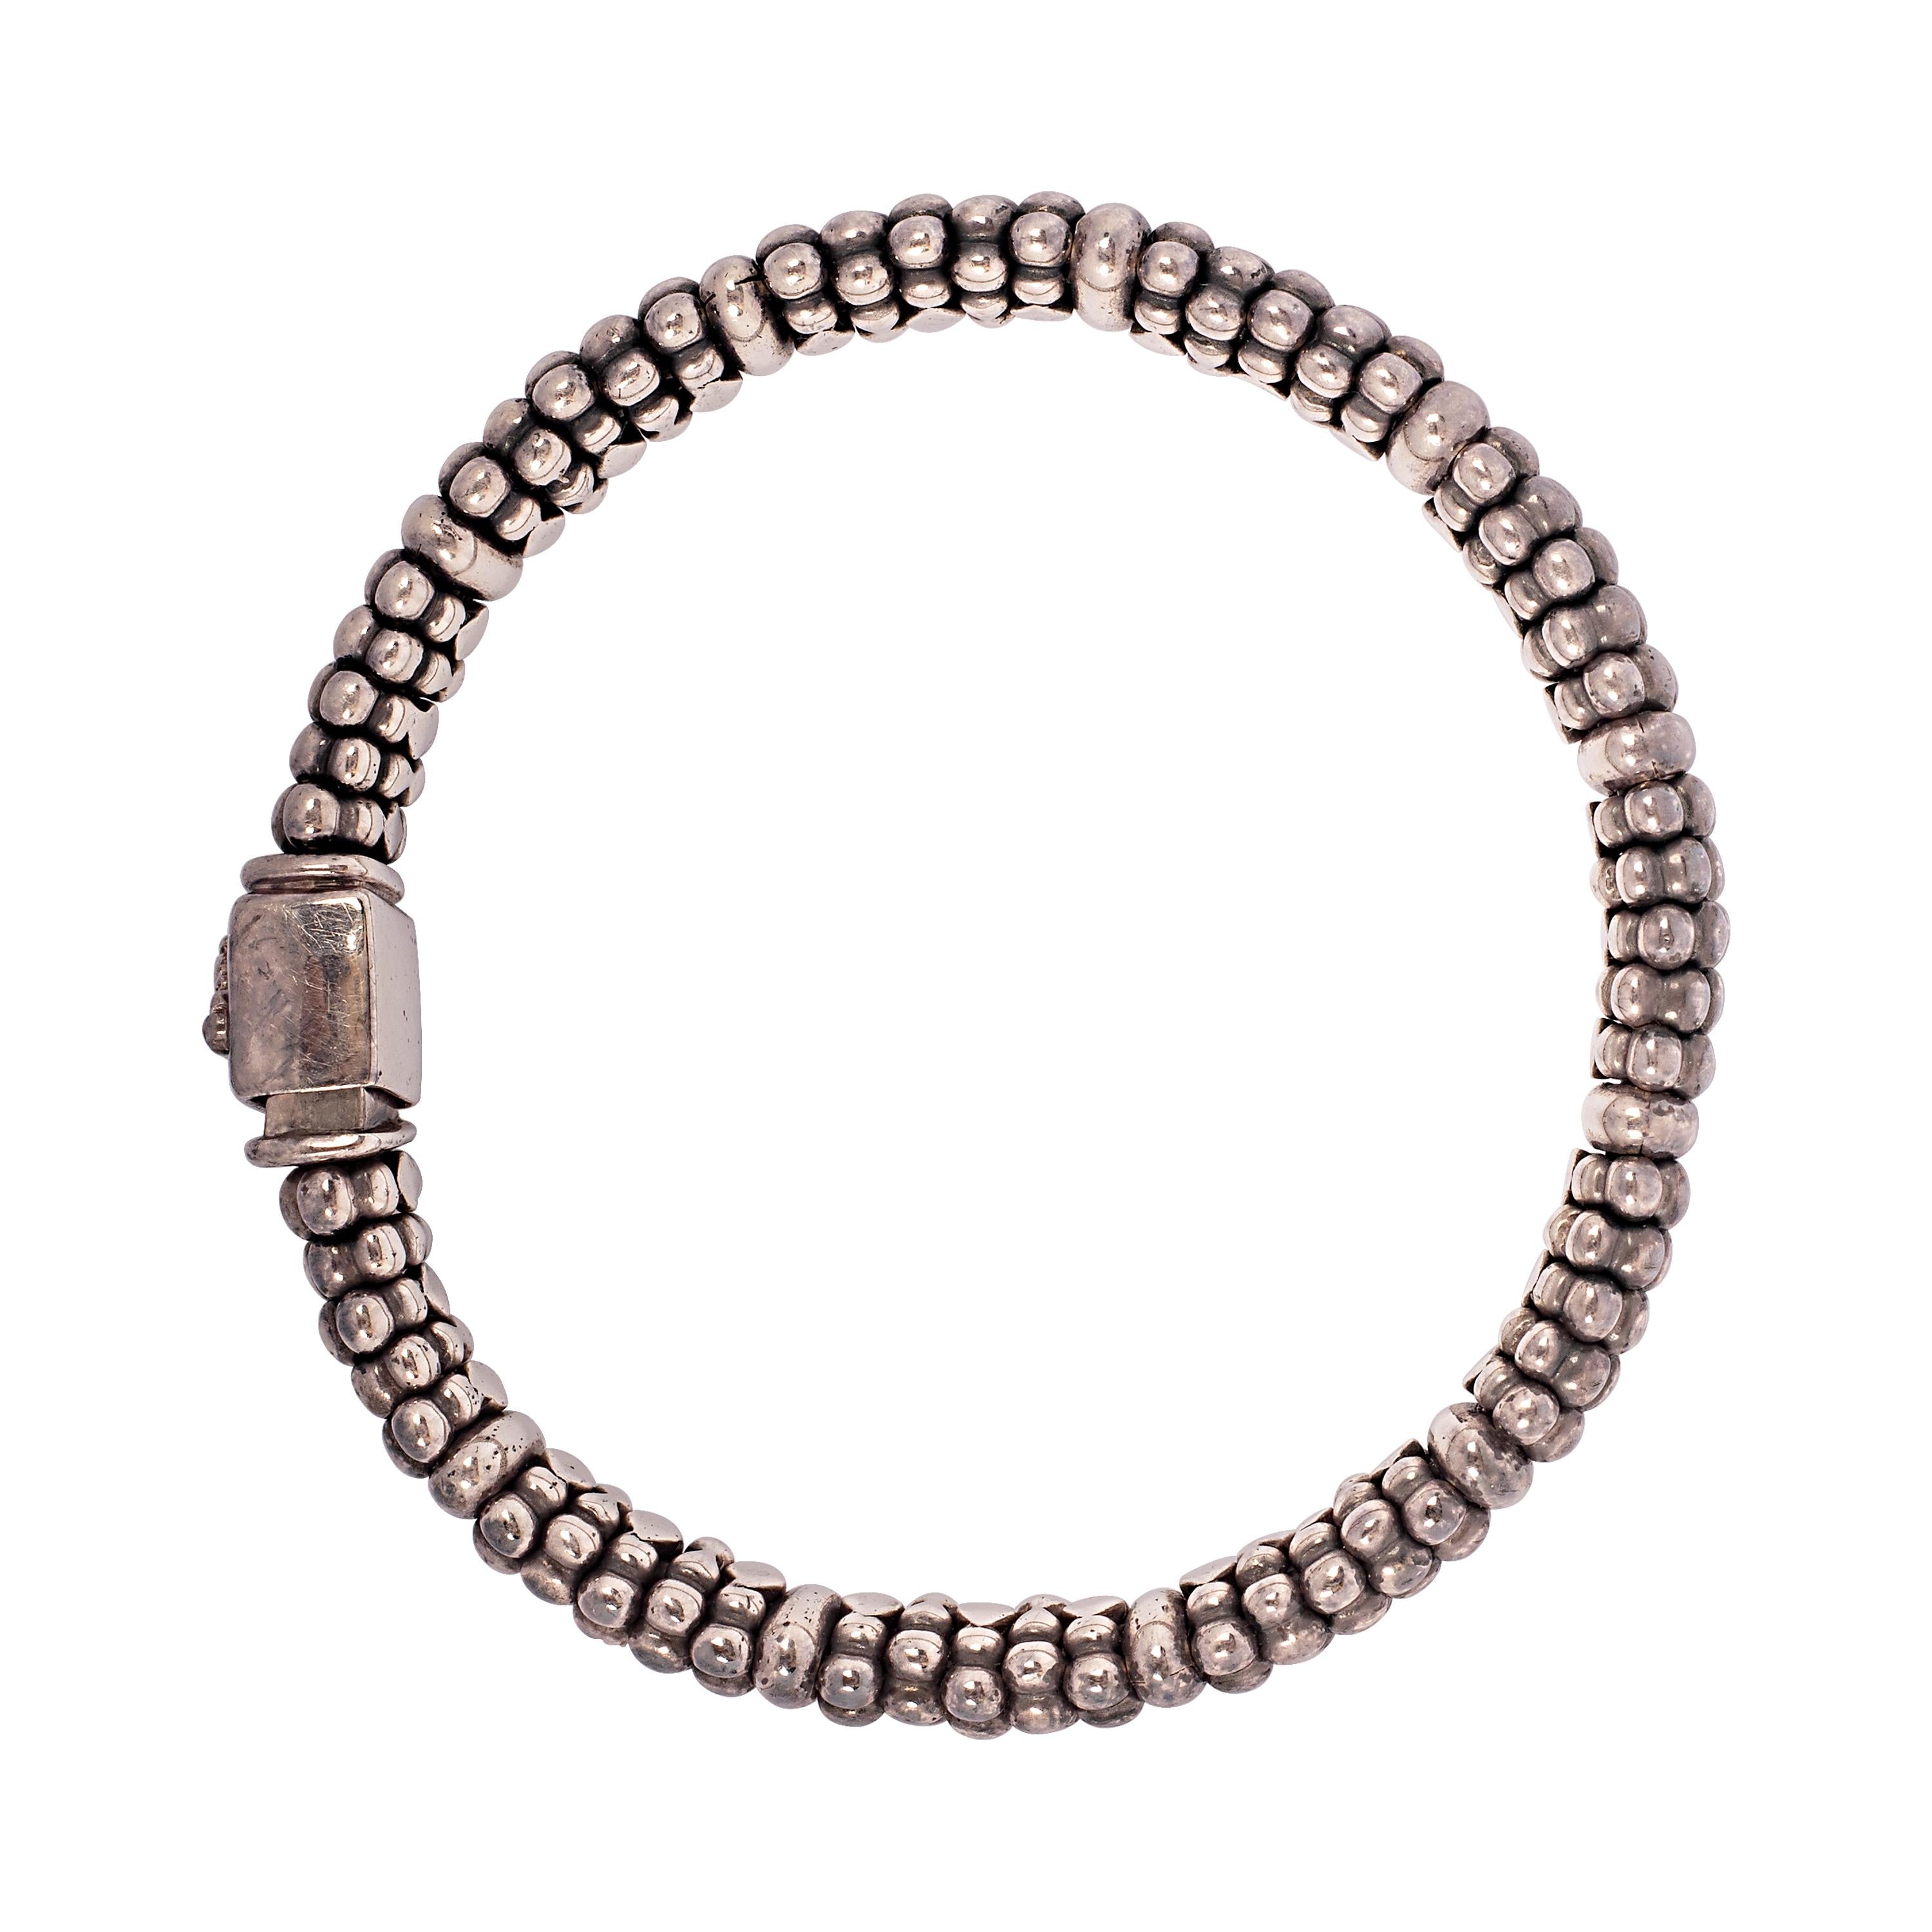 This classic sterling silver Caviar bracelet by Lagos intersperses rows of beading with bands of smooth polished silver to create contrast and textural depth. Completed by a box clasp with the Lagos crest. The bracelet measures 6 mm in width and 7